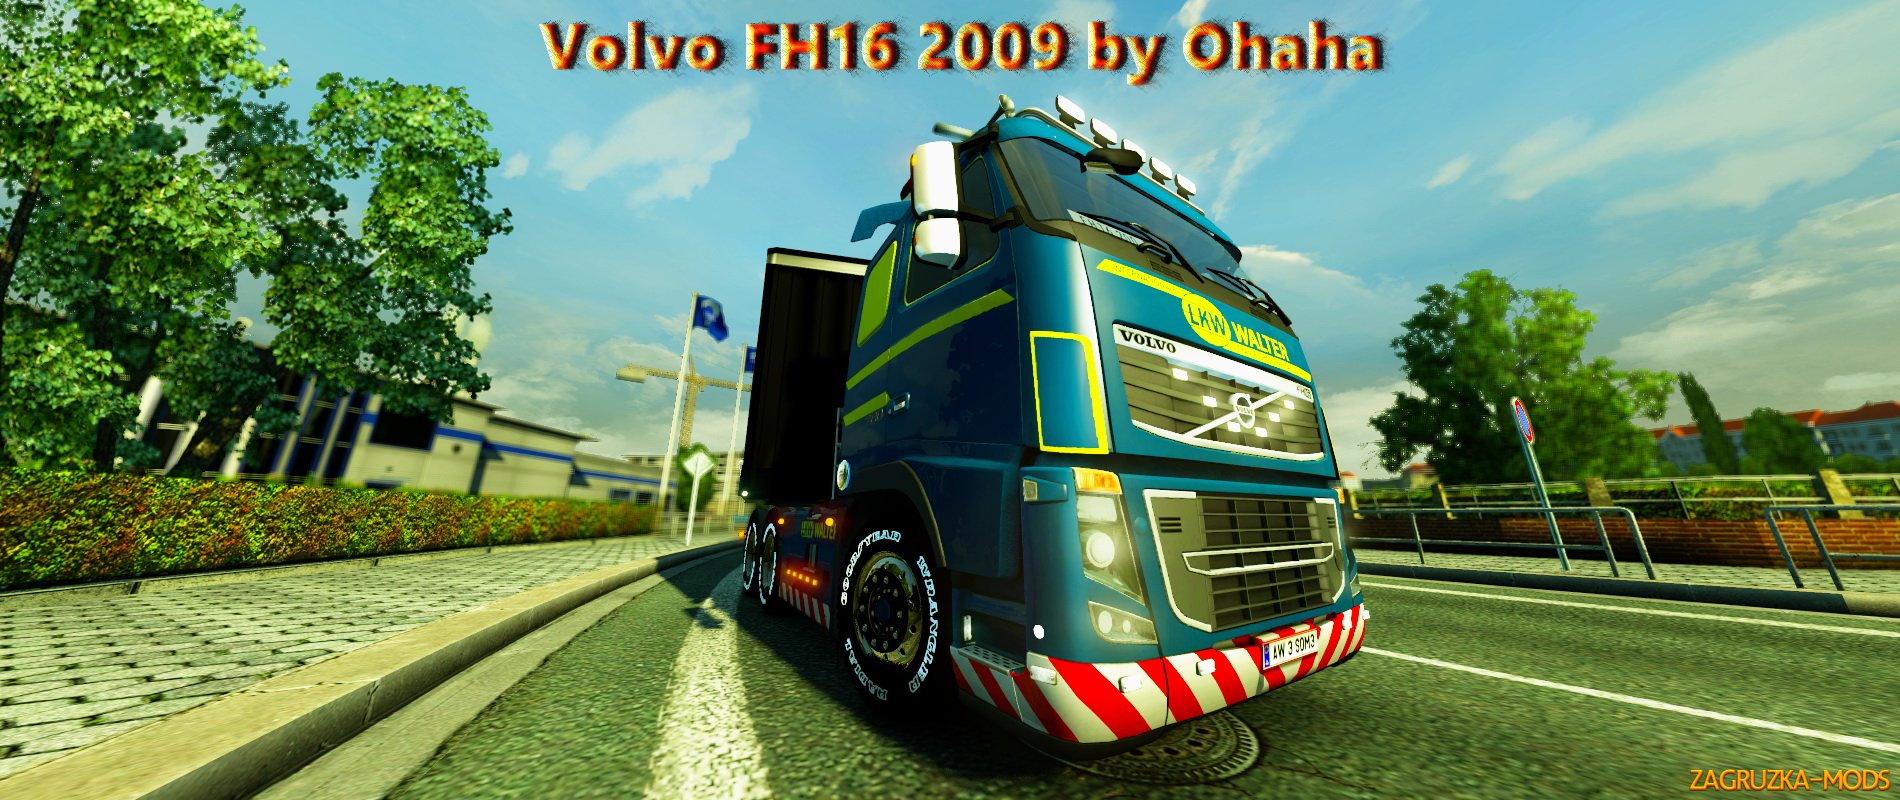 Volvo FH16 2009 v15.1r by Ohaha for ETS 2